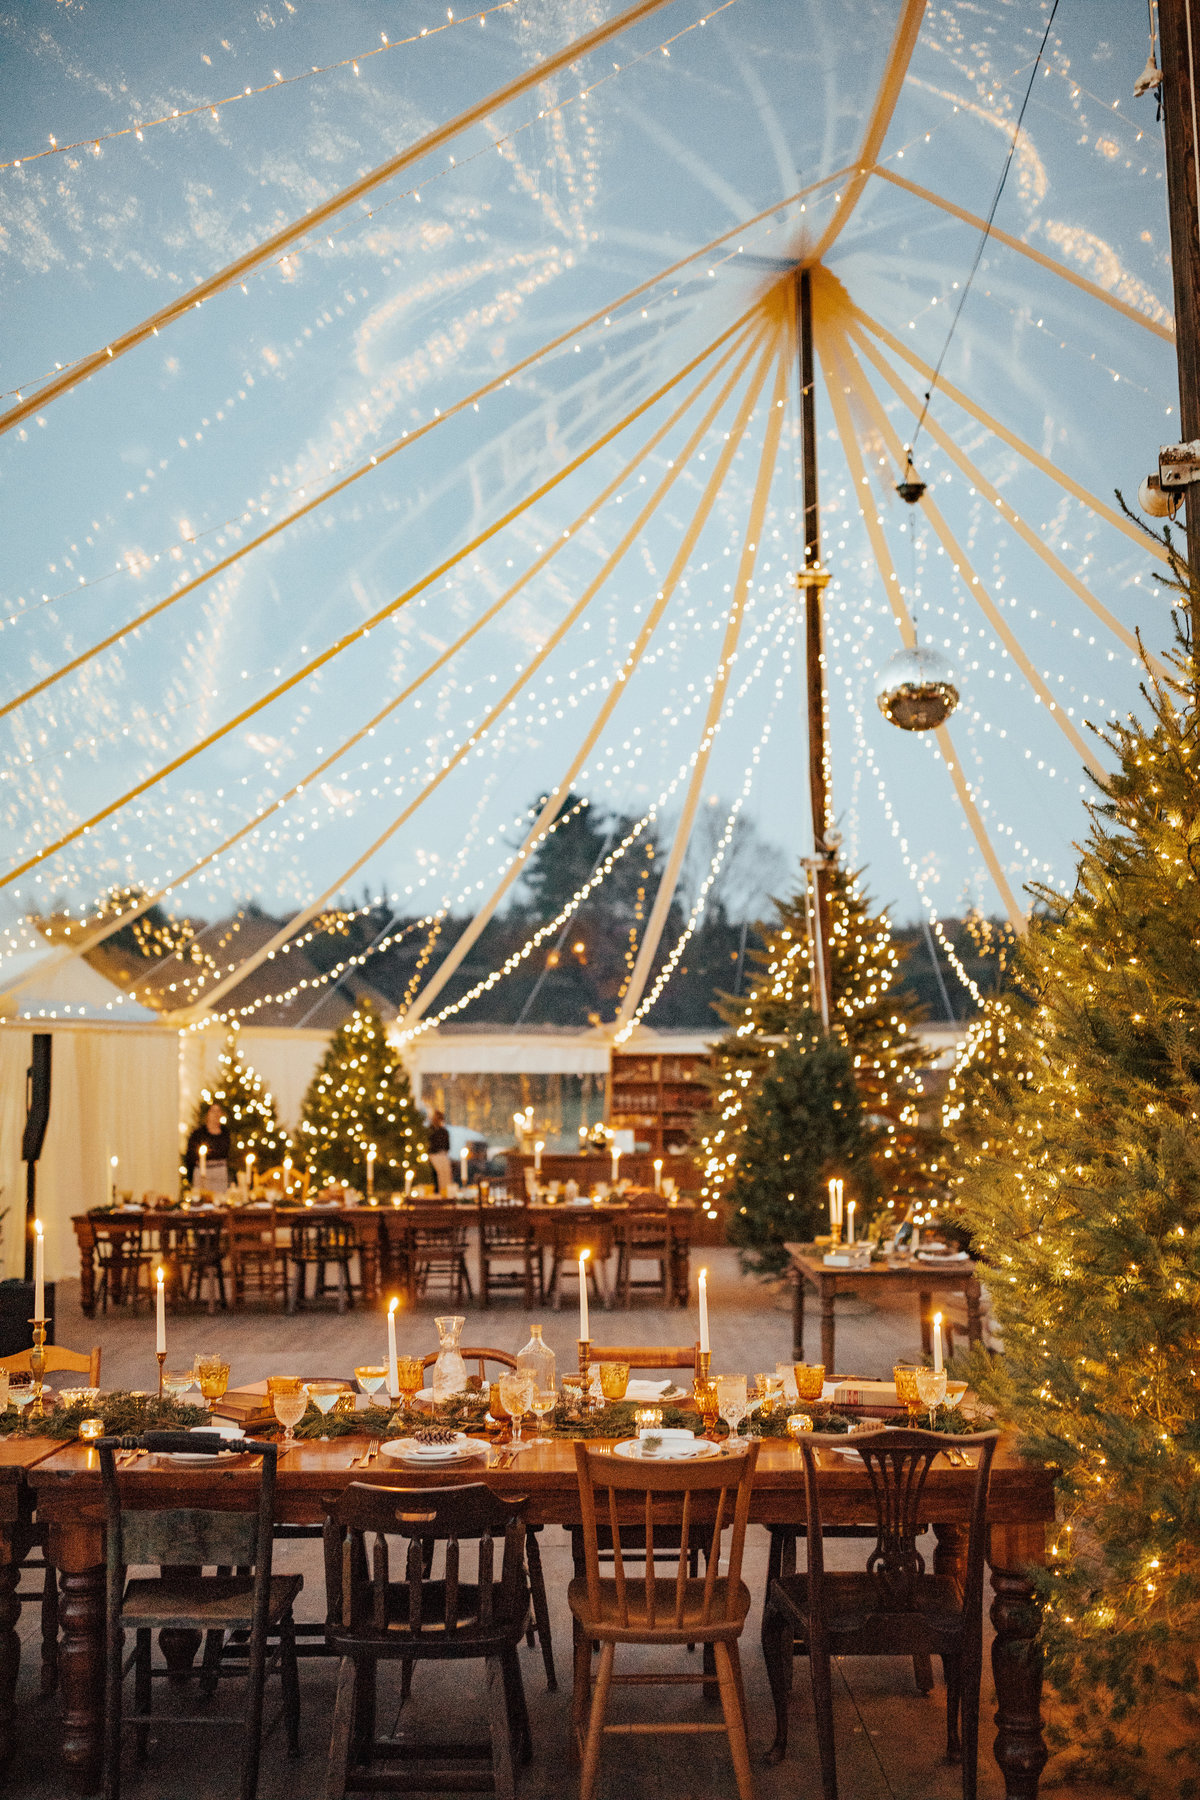 Christy-l-Johnston-Photography-Monica-Relyea-Events-Noelle-Downing-Instagram-Noelle_s-Favorite-Day-Wedding-Battenfelds-Christmas-tree-farm-Red-Hook-New-York-Hudson-Valley-upstate-november-2019-AP1A9414